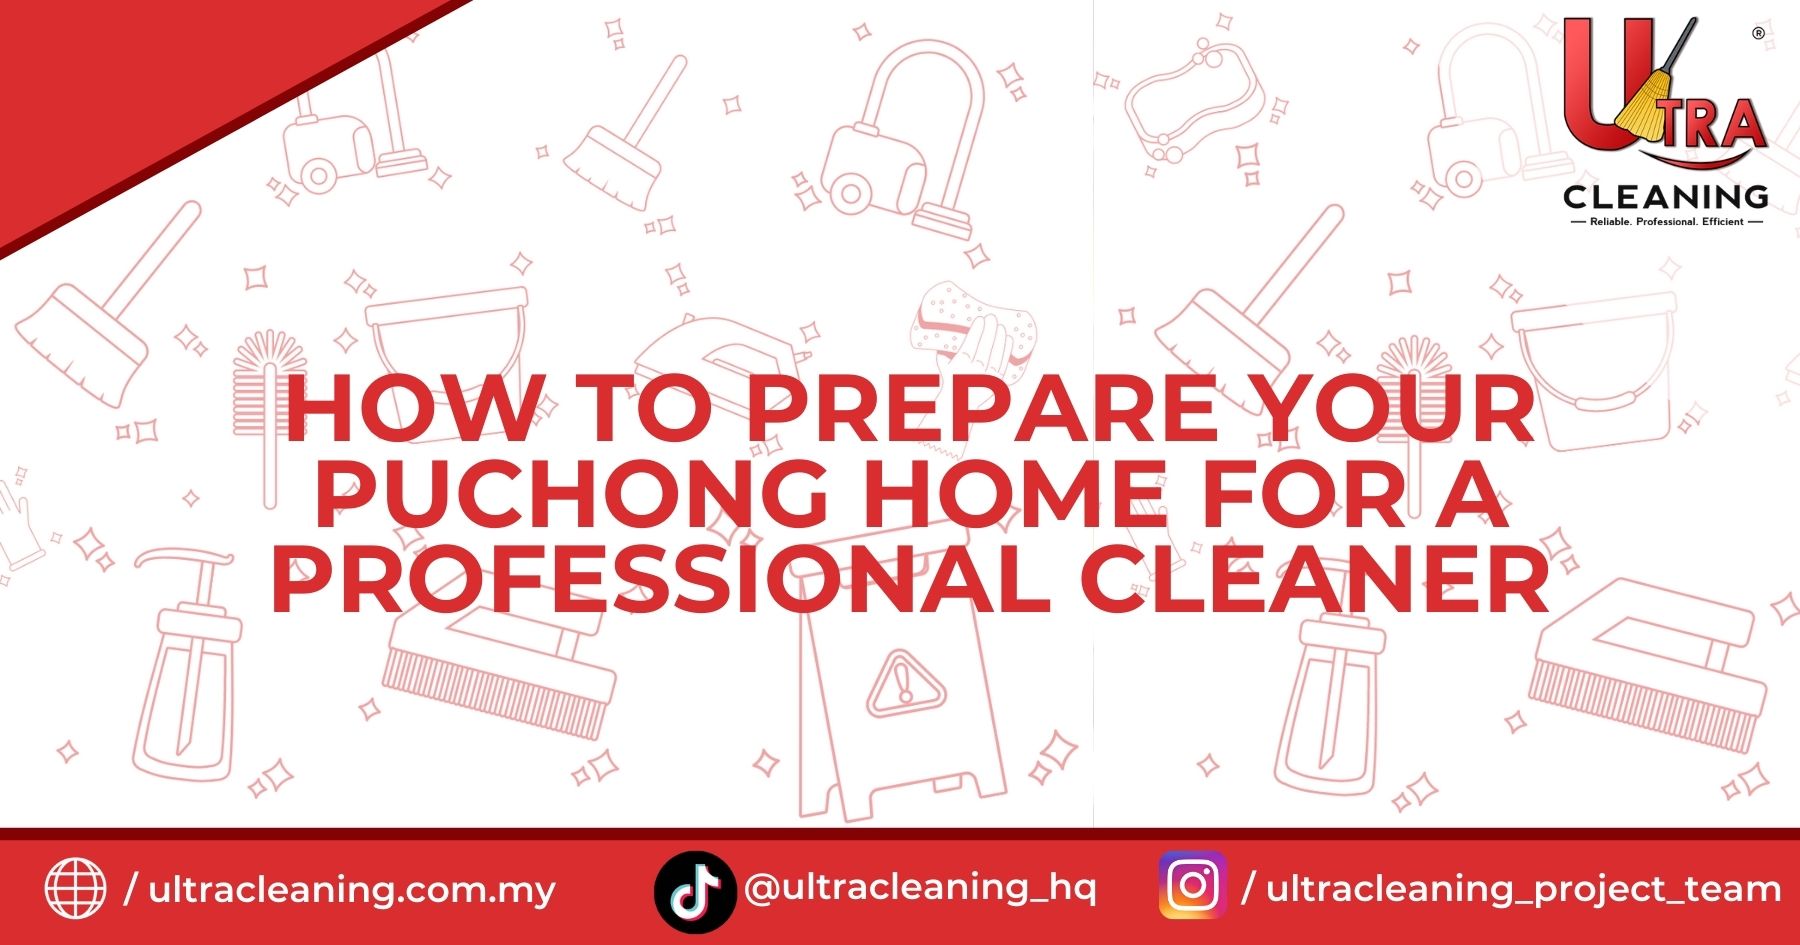 How To Prepare Your Puchong Home For a Professional Cleaner